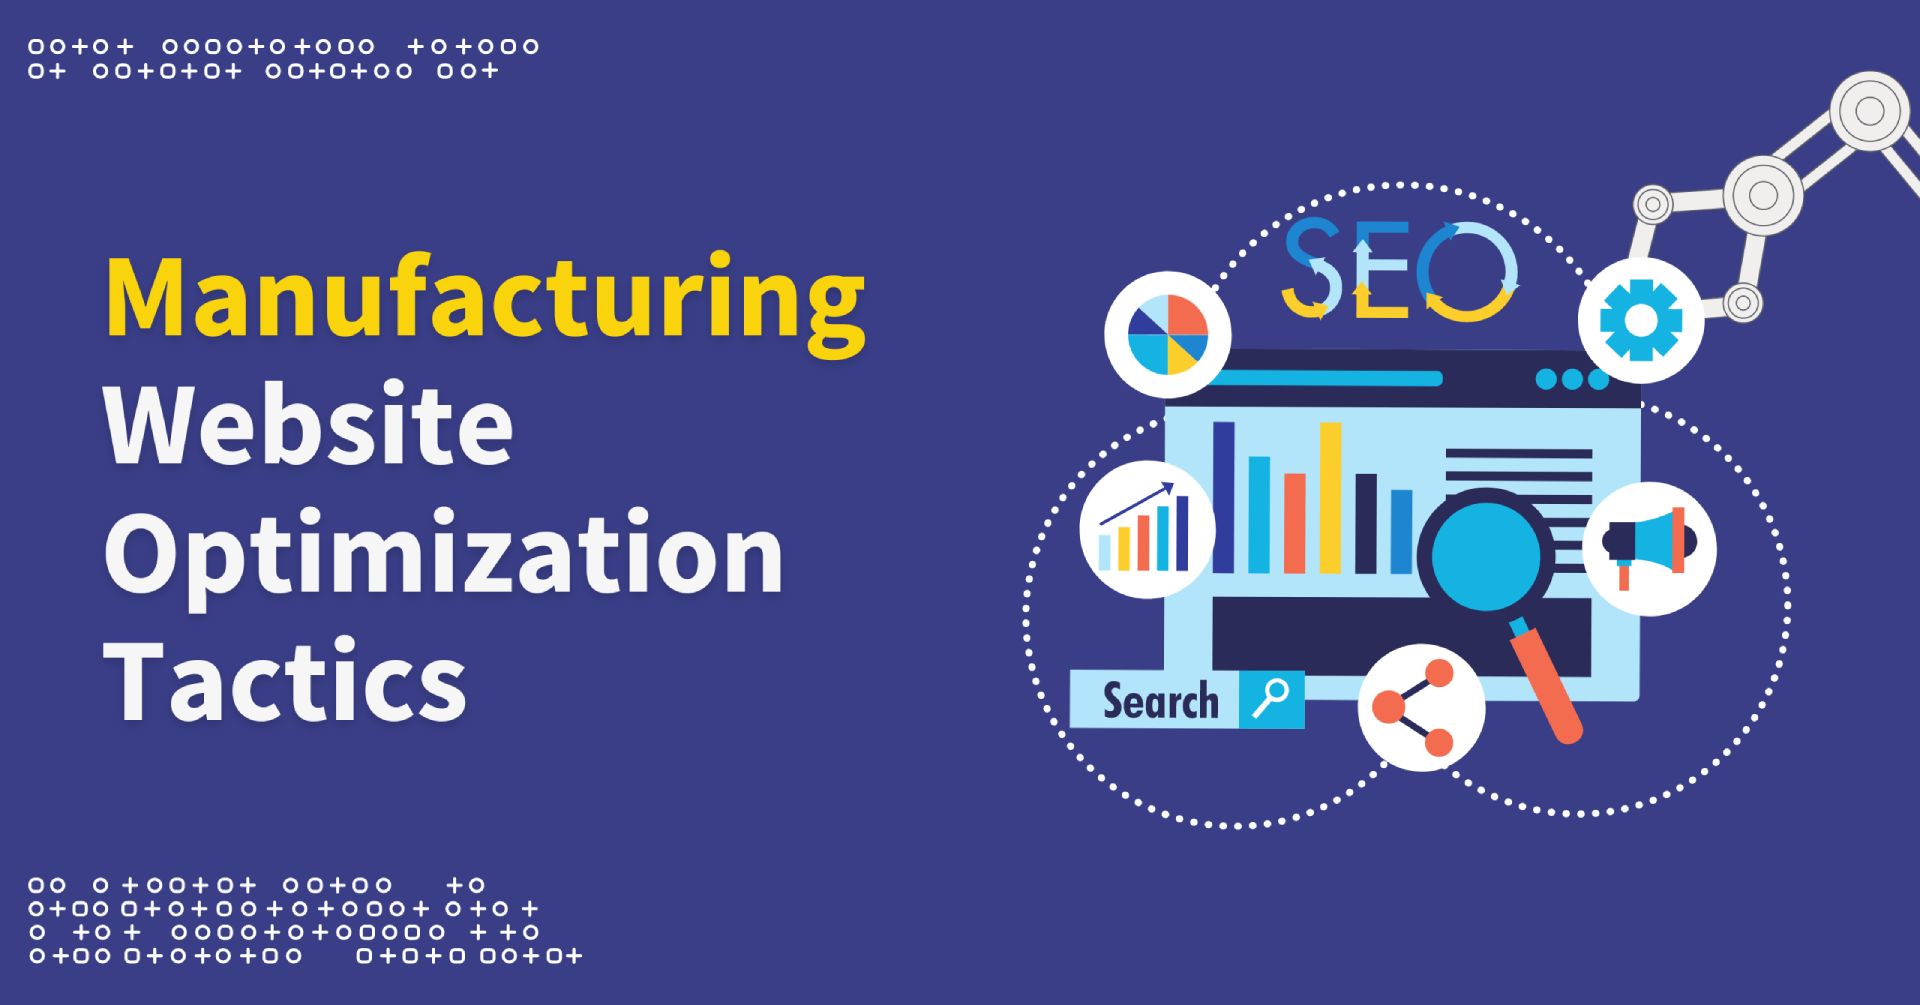 Lead Generation For Manufacturers: How to Optimize Your Website